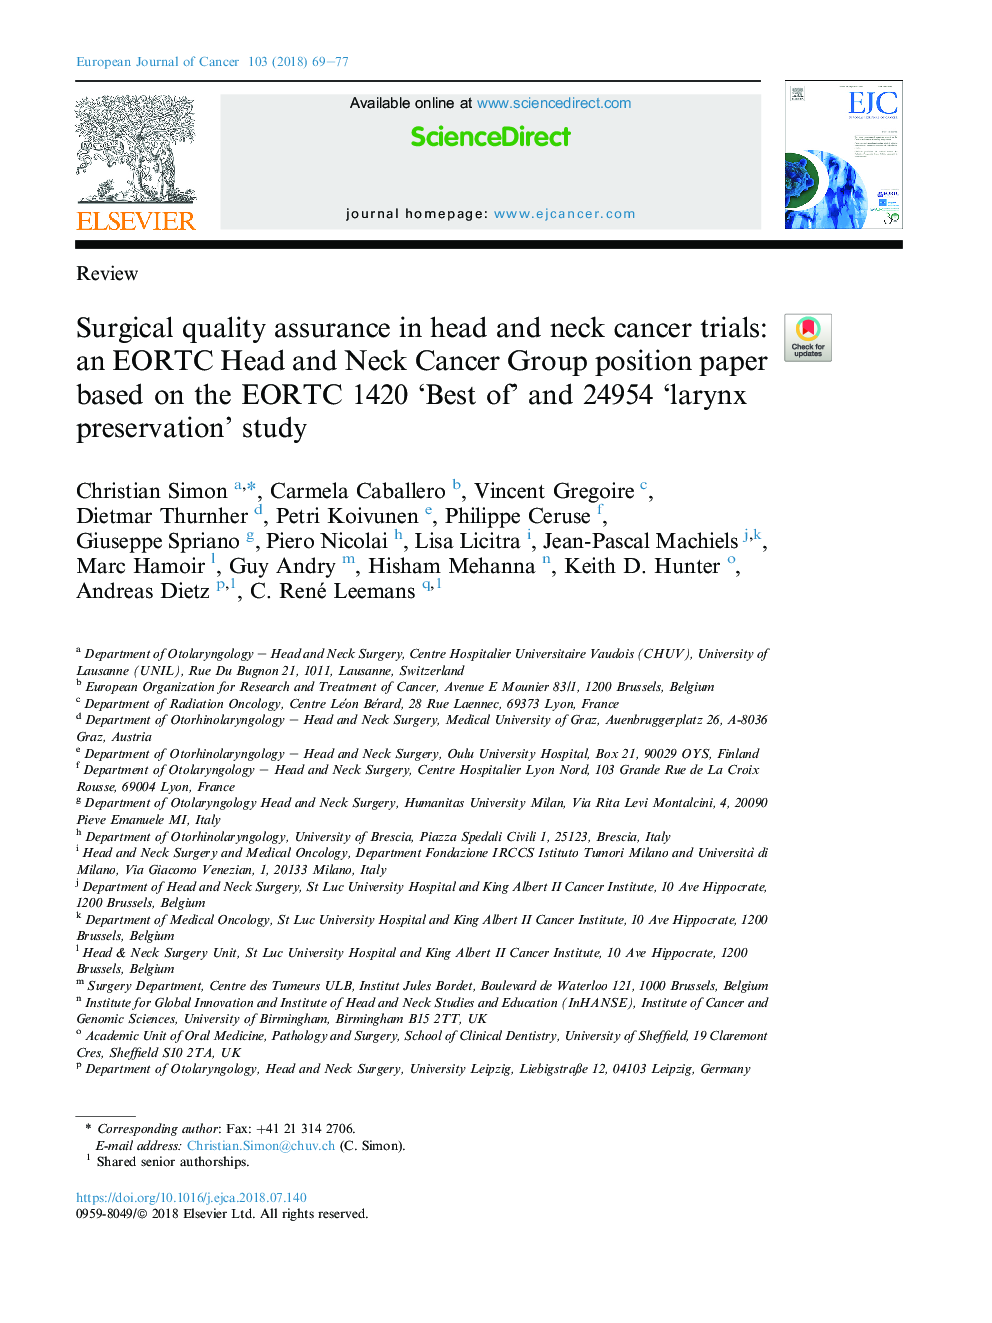 Surgical quality assurance in head and neck cancer trials: an EORTC Head and Neck Cancer GroupÂ position paper based on the EORTC 1420 'Best of' and 24954 'larynx preservation' study